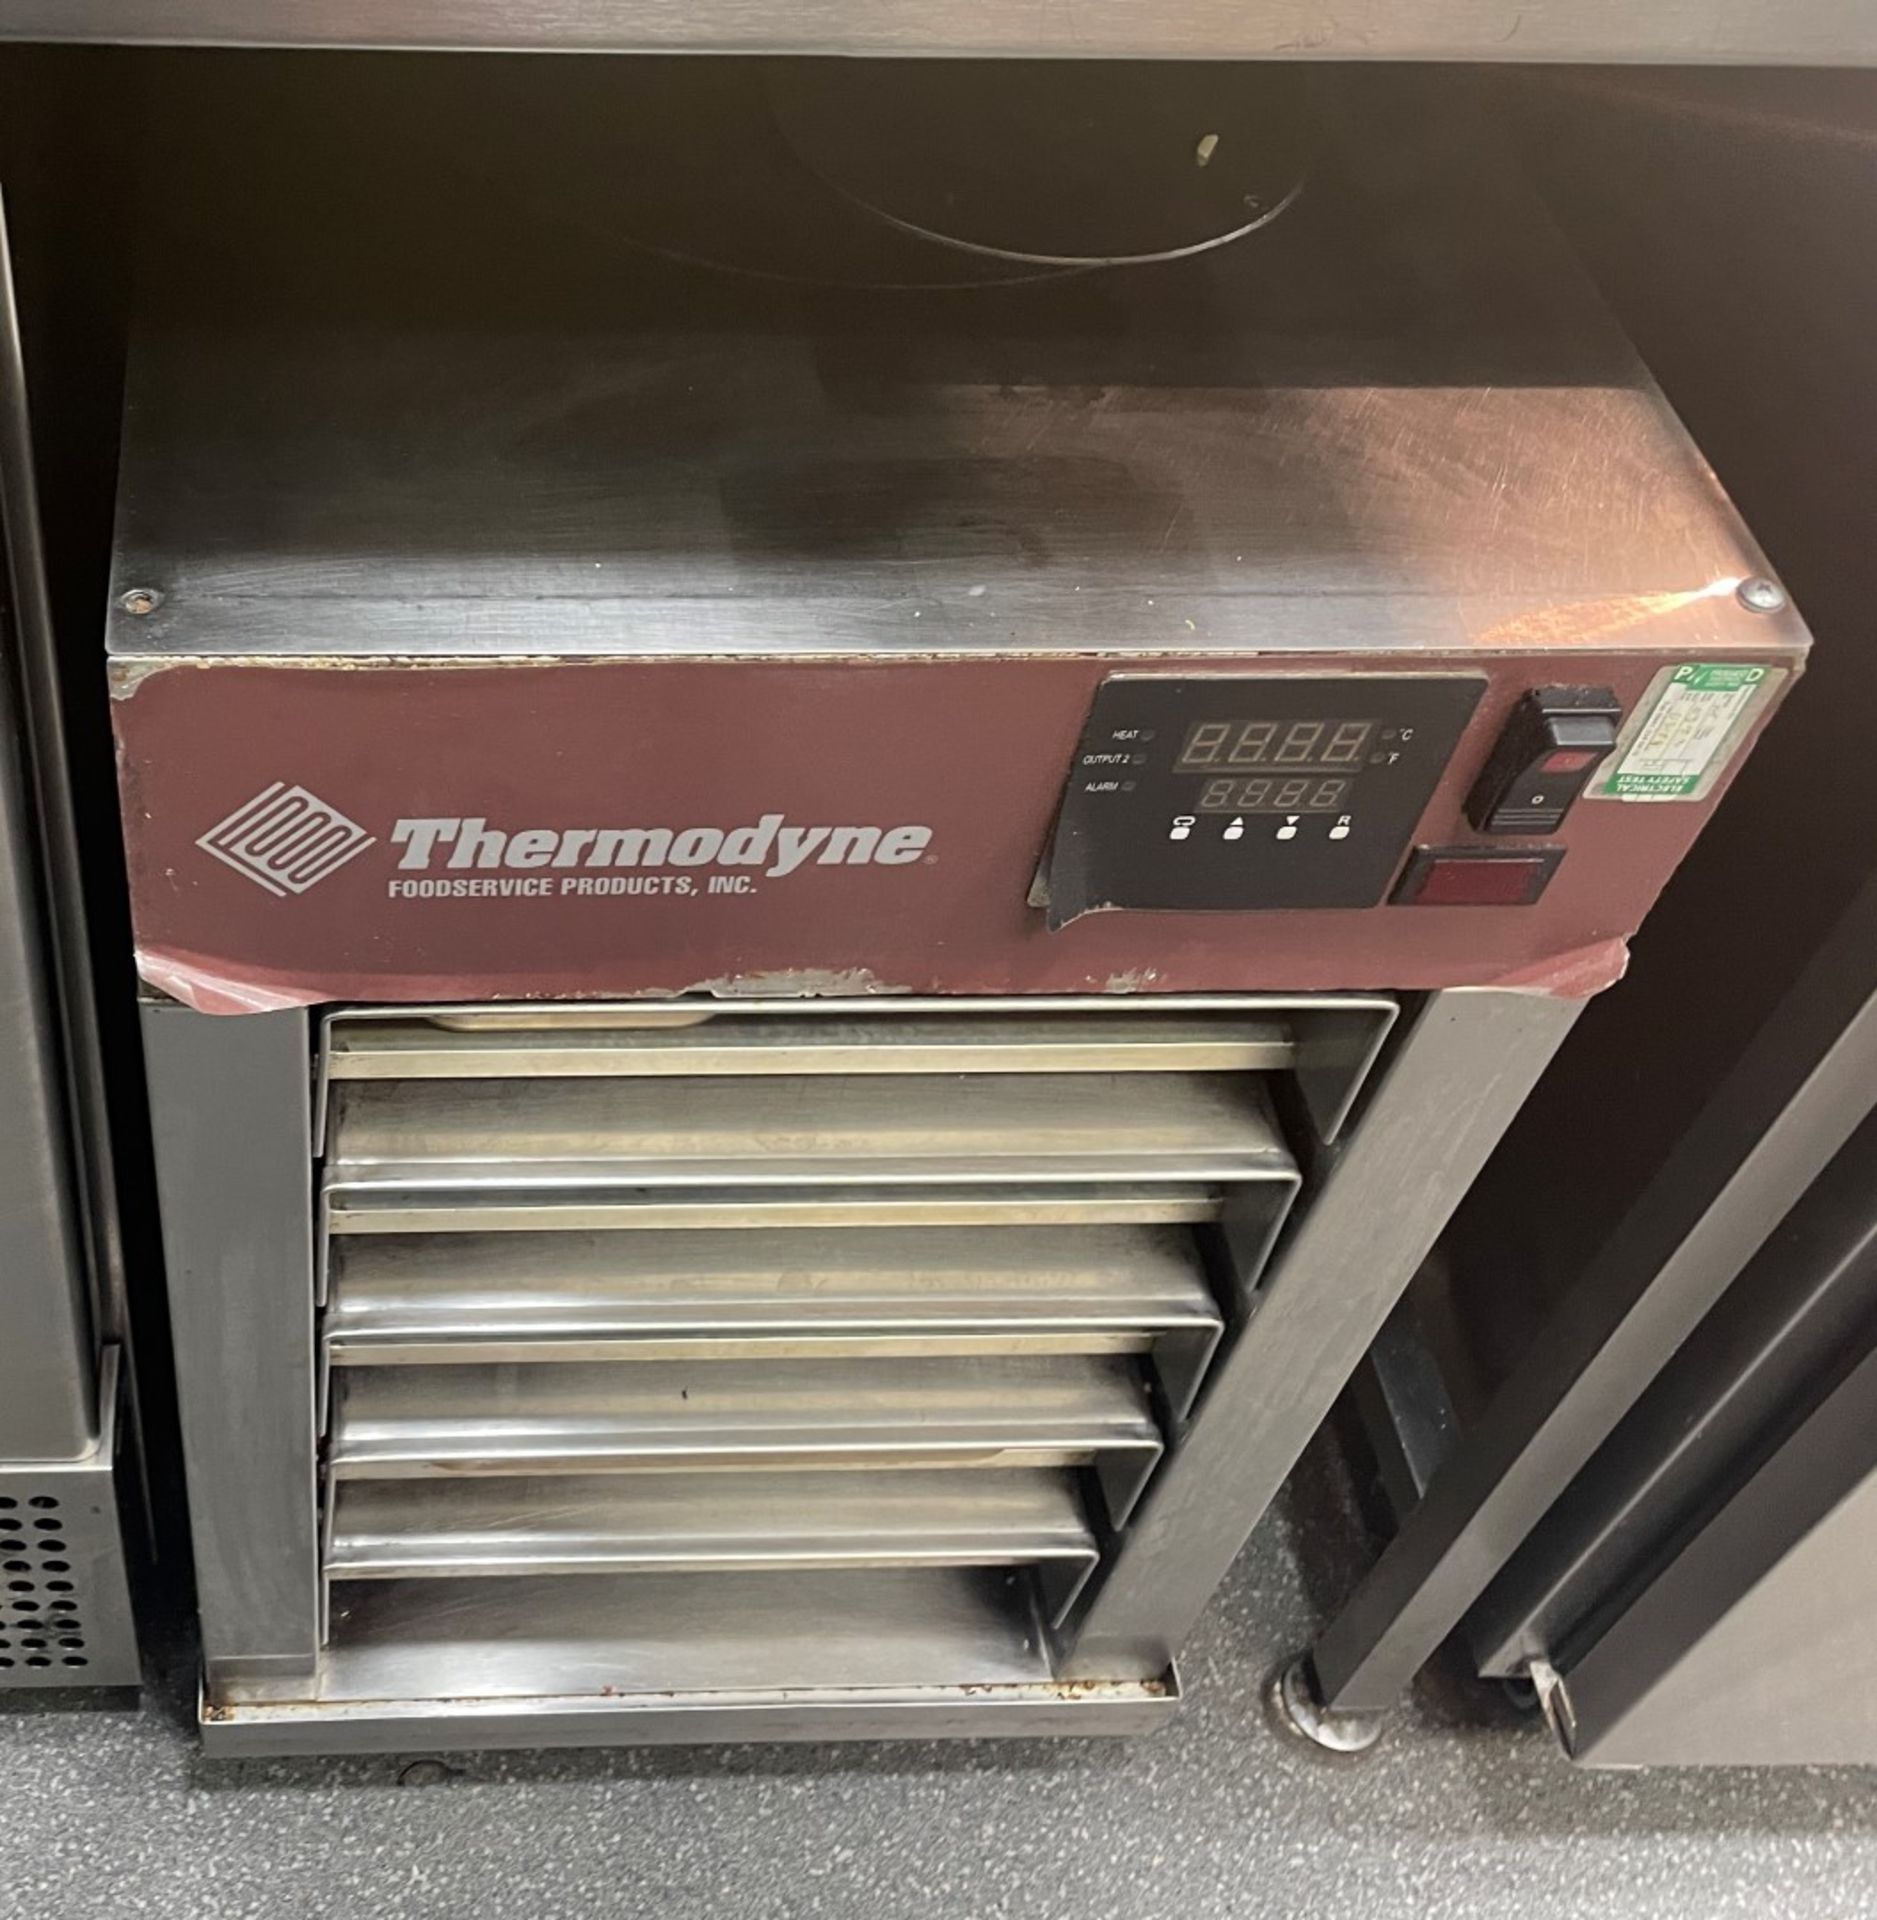 1 x -Thermodyne Counter-Top Slow Cook and Hold Oven - 240V - Image 3 of 6